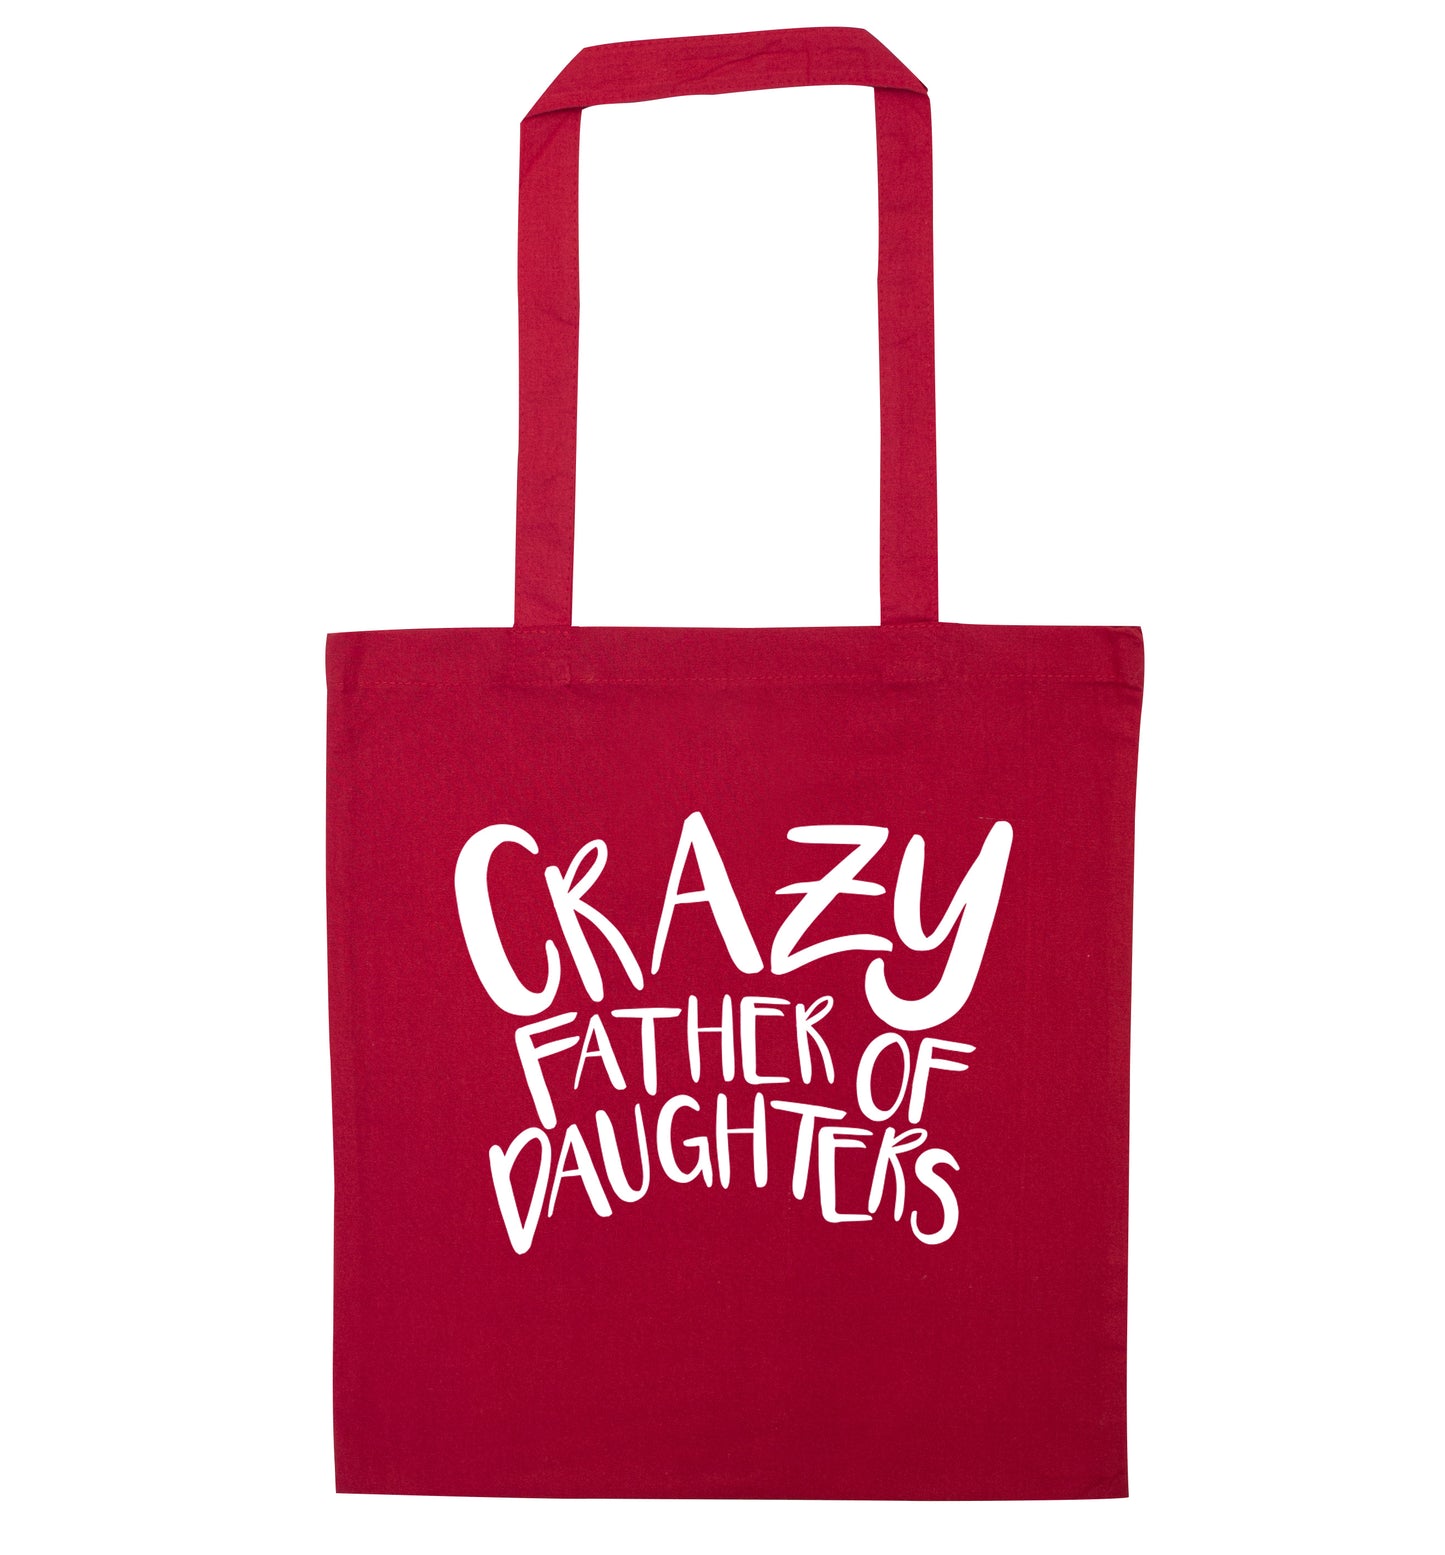 Crazy father of daughters red tote bag